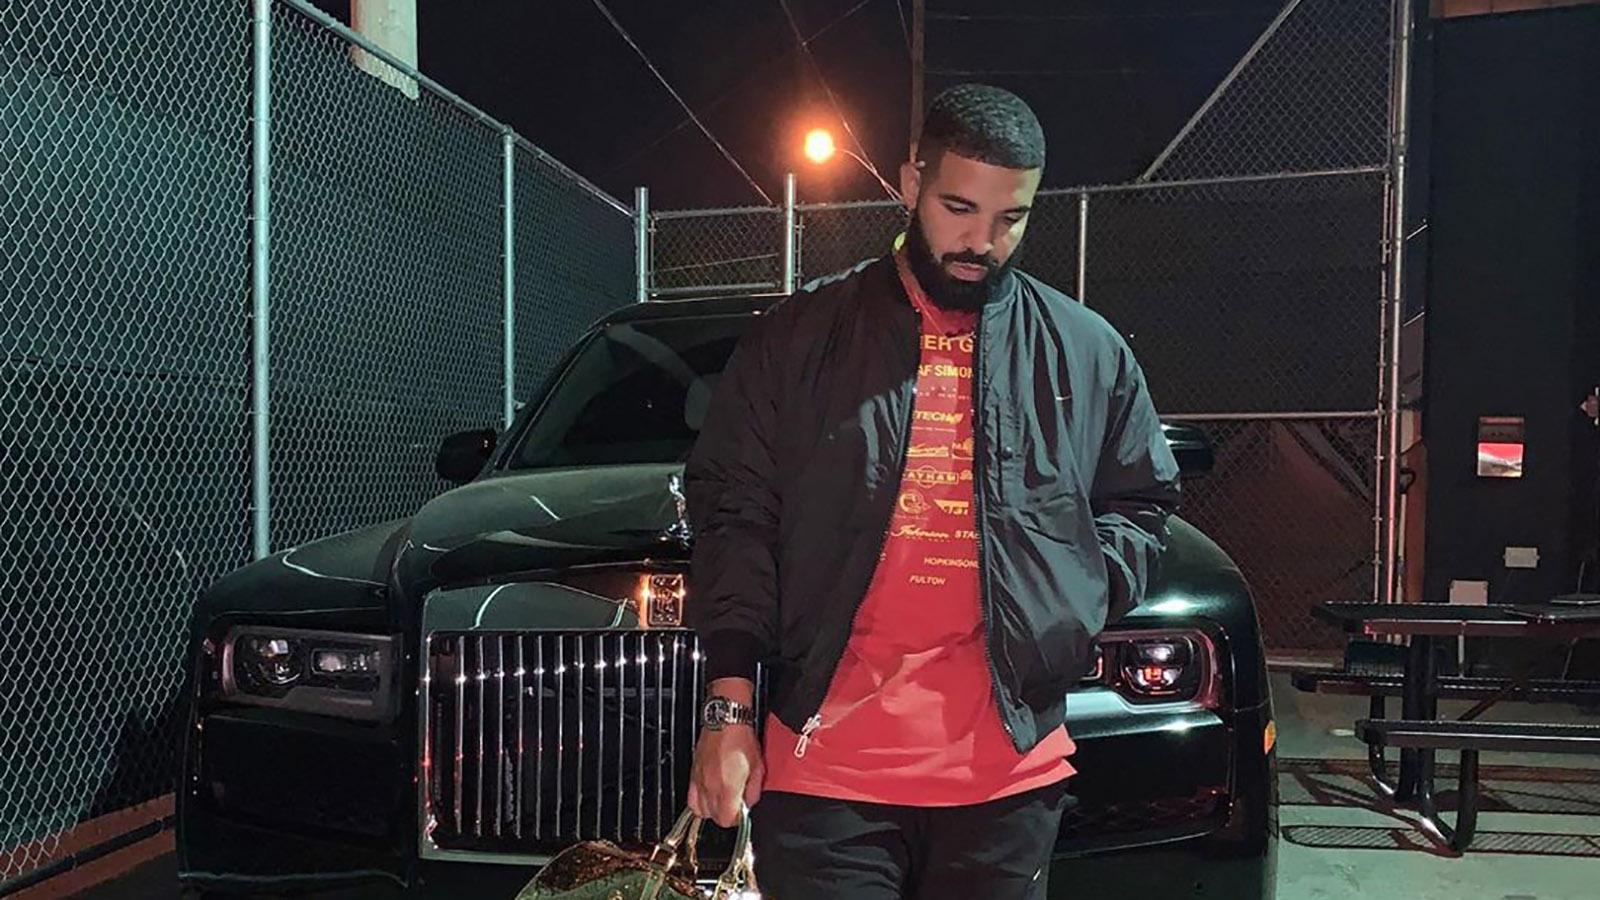 bao drake surprised the world by giving mike tyson his rolls royce cullinan when hiring him as his bodyguard and co star in his upcoming mv 65352e885eaa9 Drake Surprised The World By Giving Mike Tyson His Rolls-royce Cullinan When Hiring Him As His Bodyguard And Co-star In His Upcoming Mv.